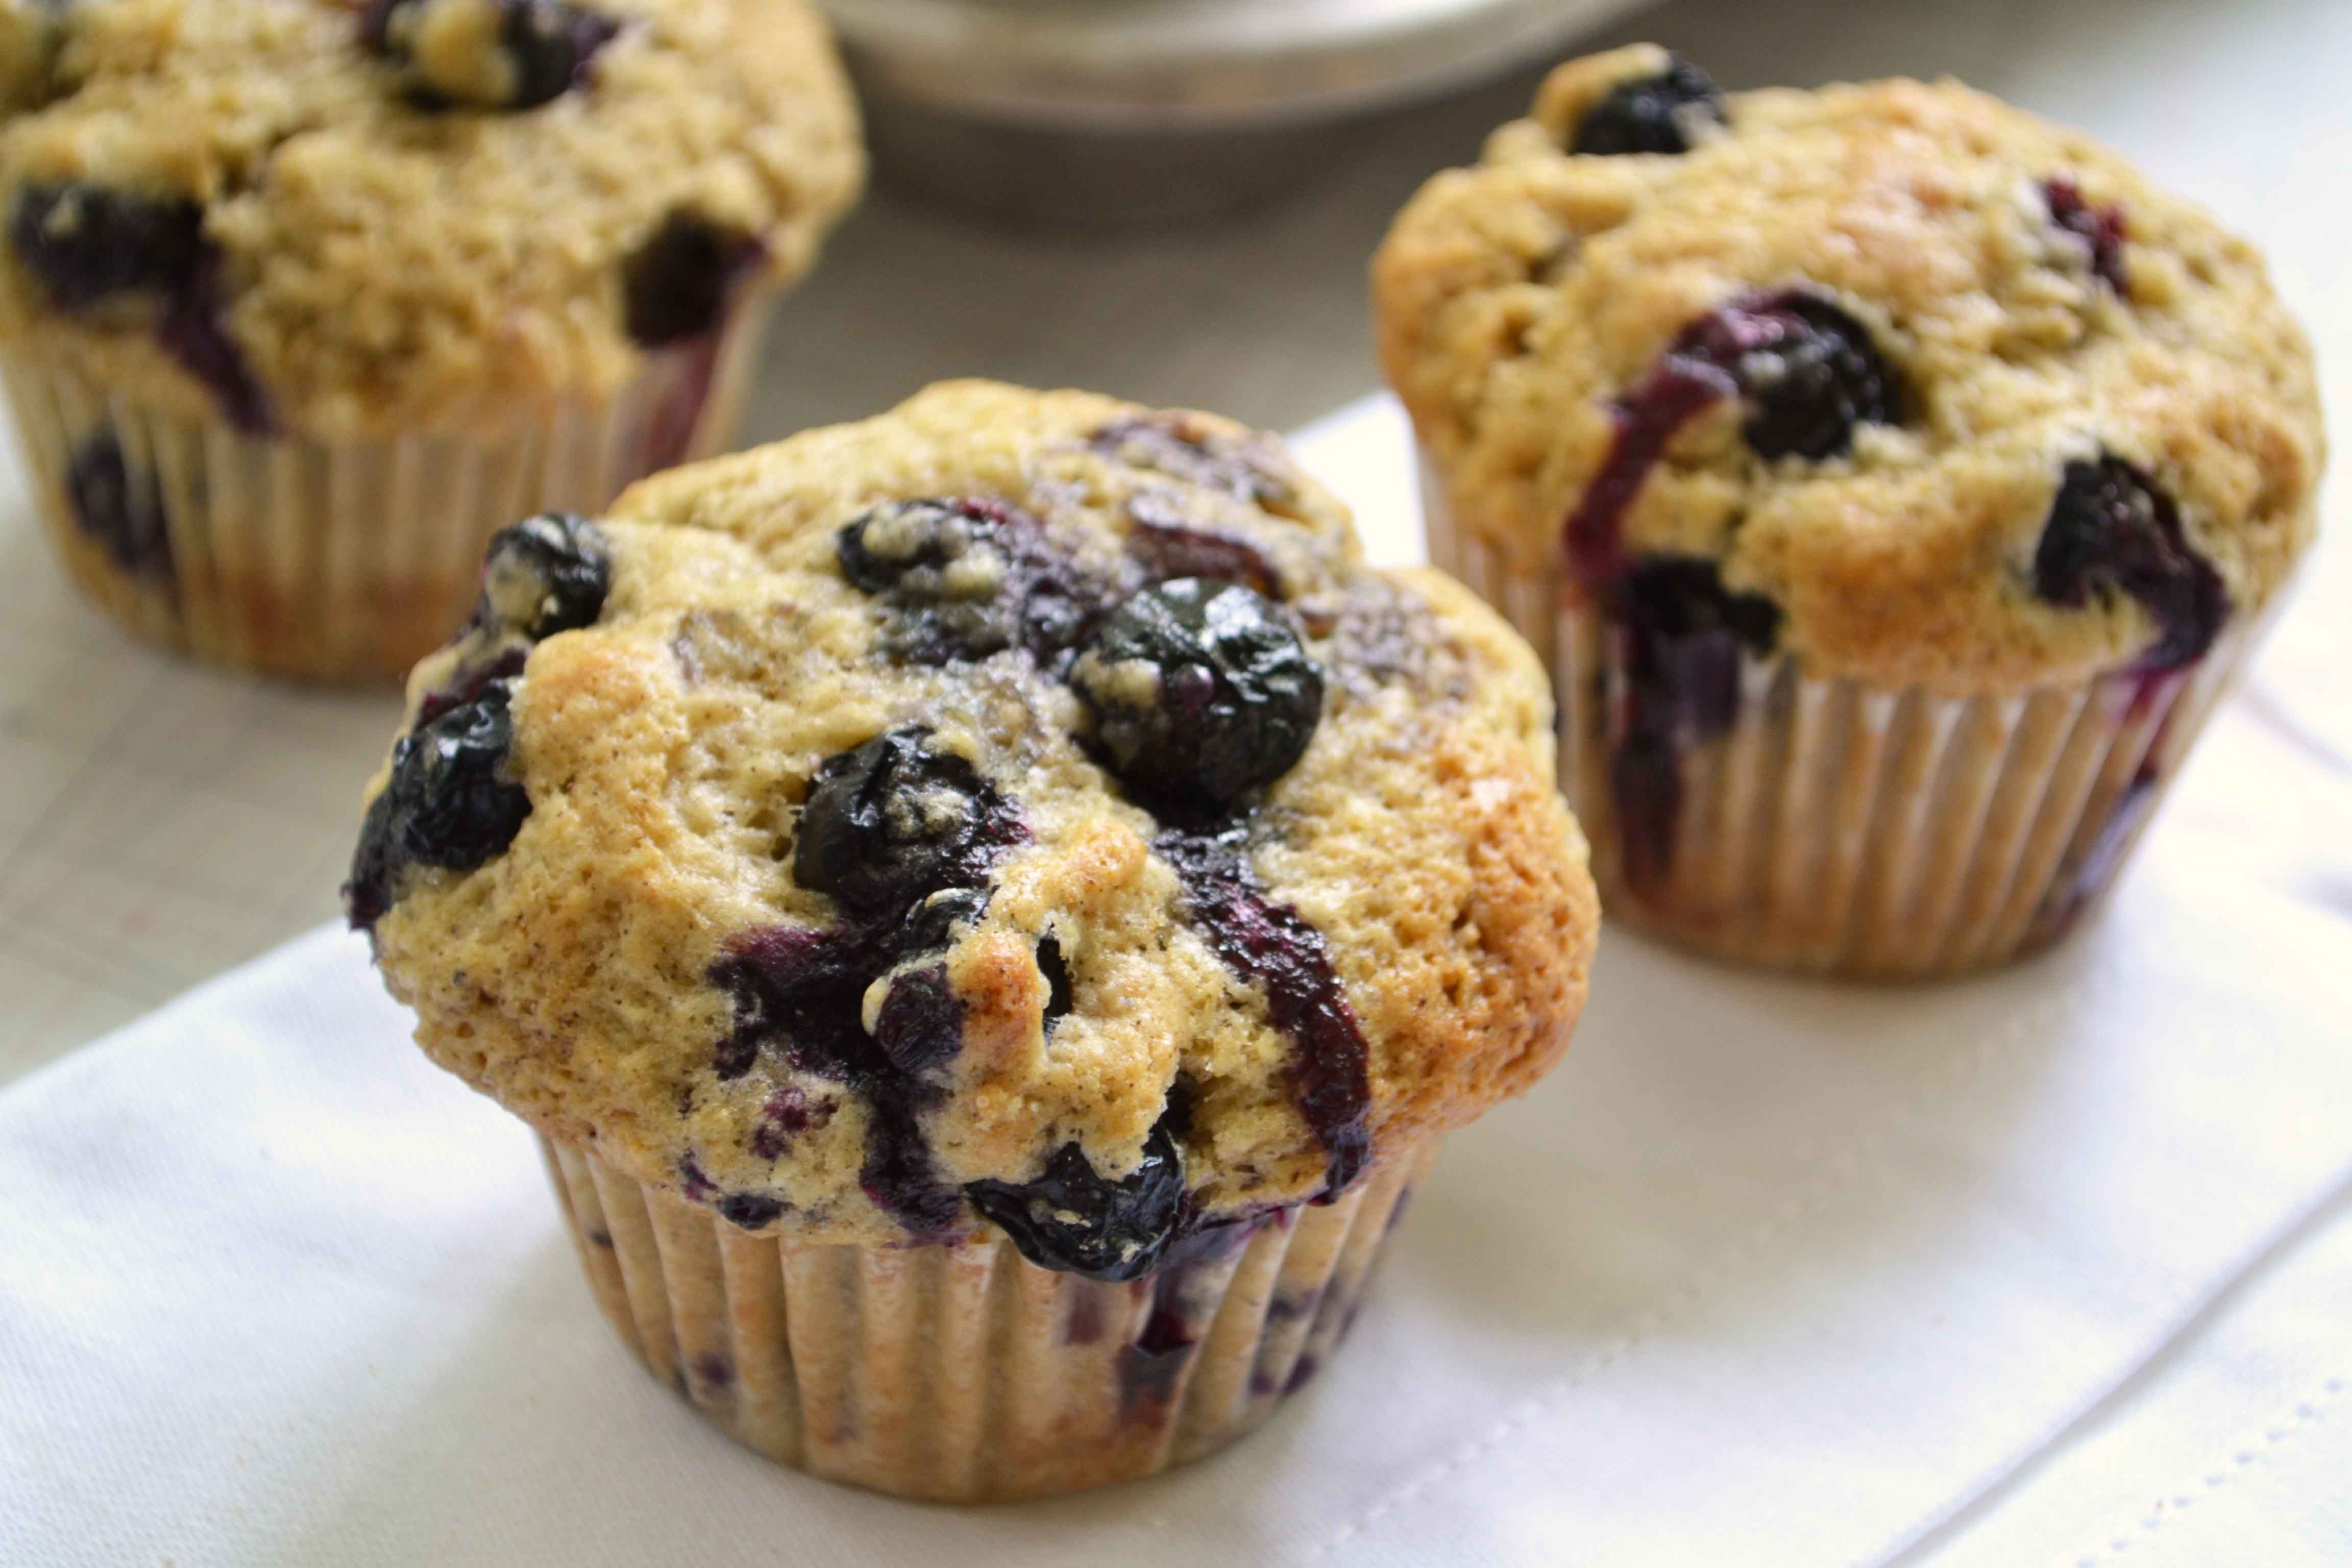 Top Blueberry Muffin HQ Pictures, Blueberry Muffin WD+99 Wallpapers.